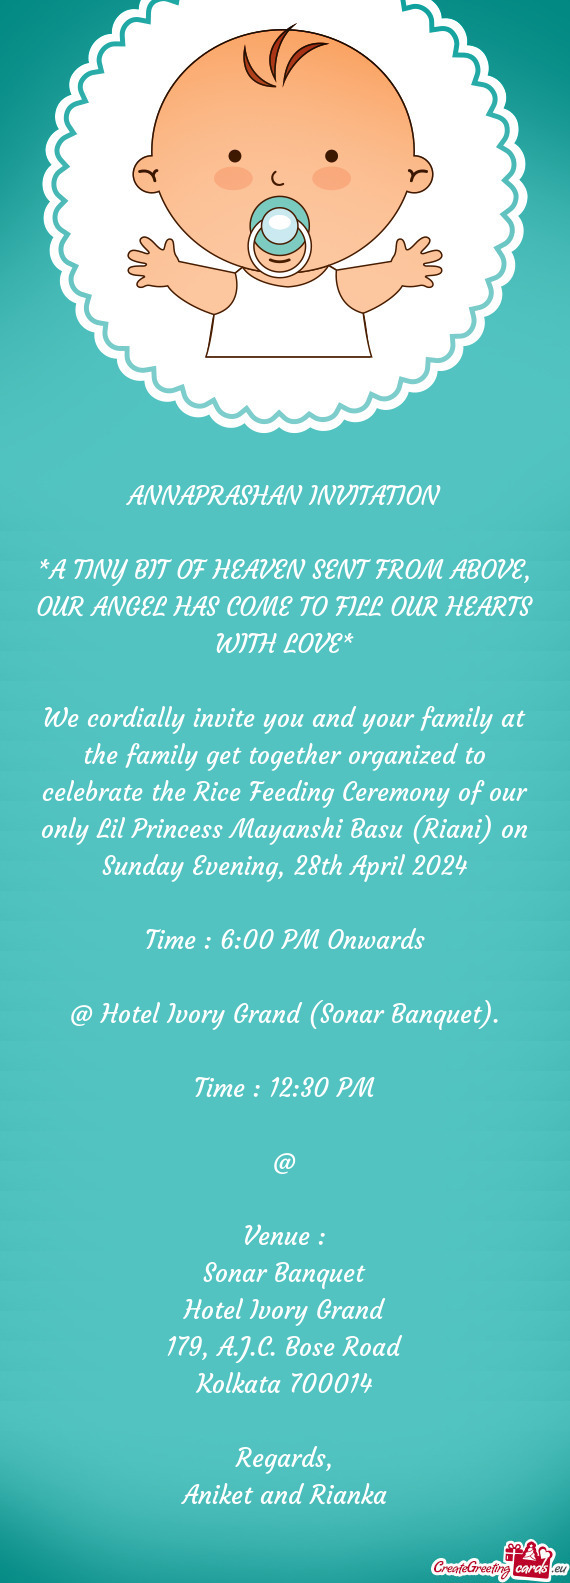 We cordially invite you and your family at the family get together organized to celebrate the Rice F